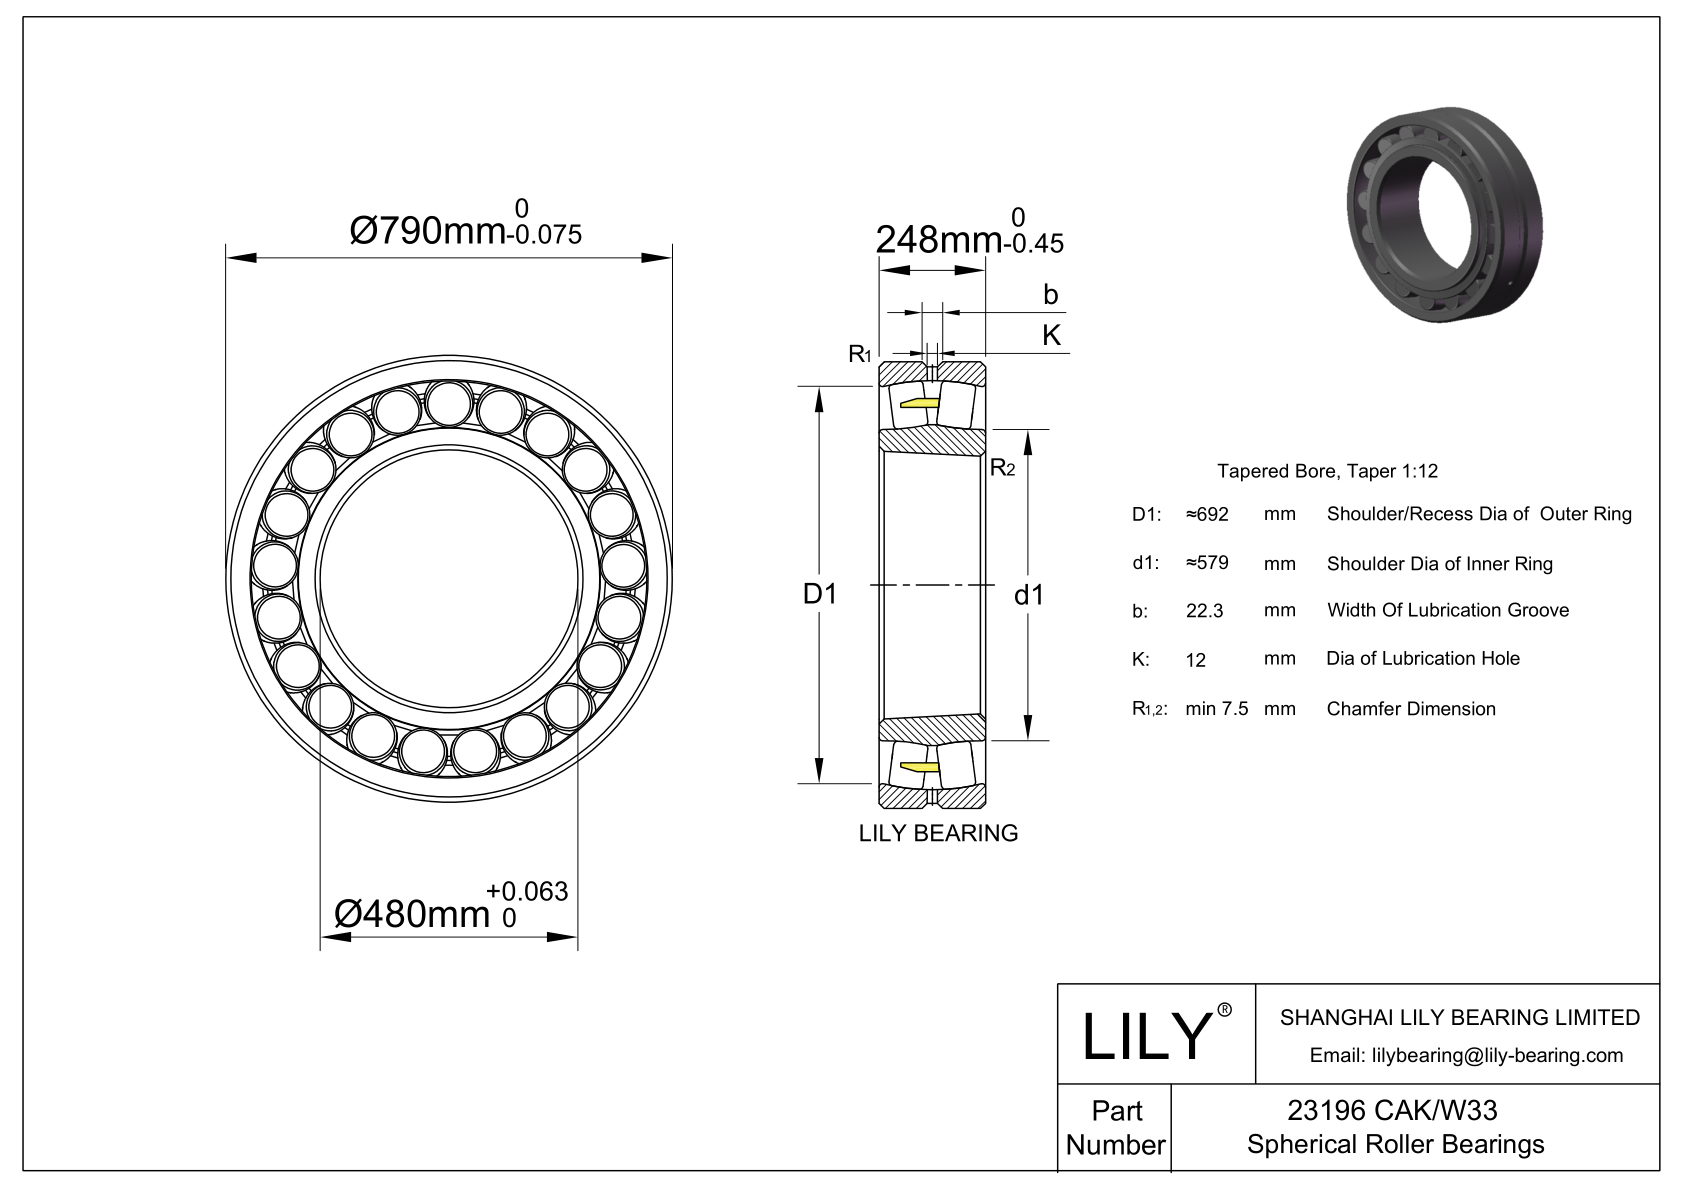 23196 CAK/W33 Double Row Spherical Roller Bearing cad drawing